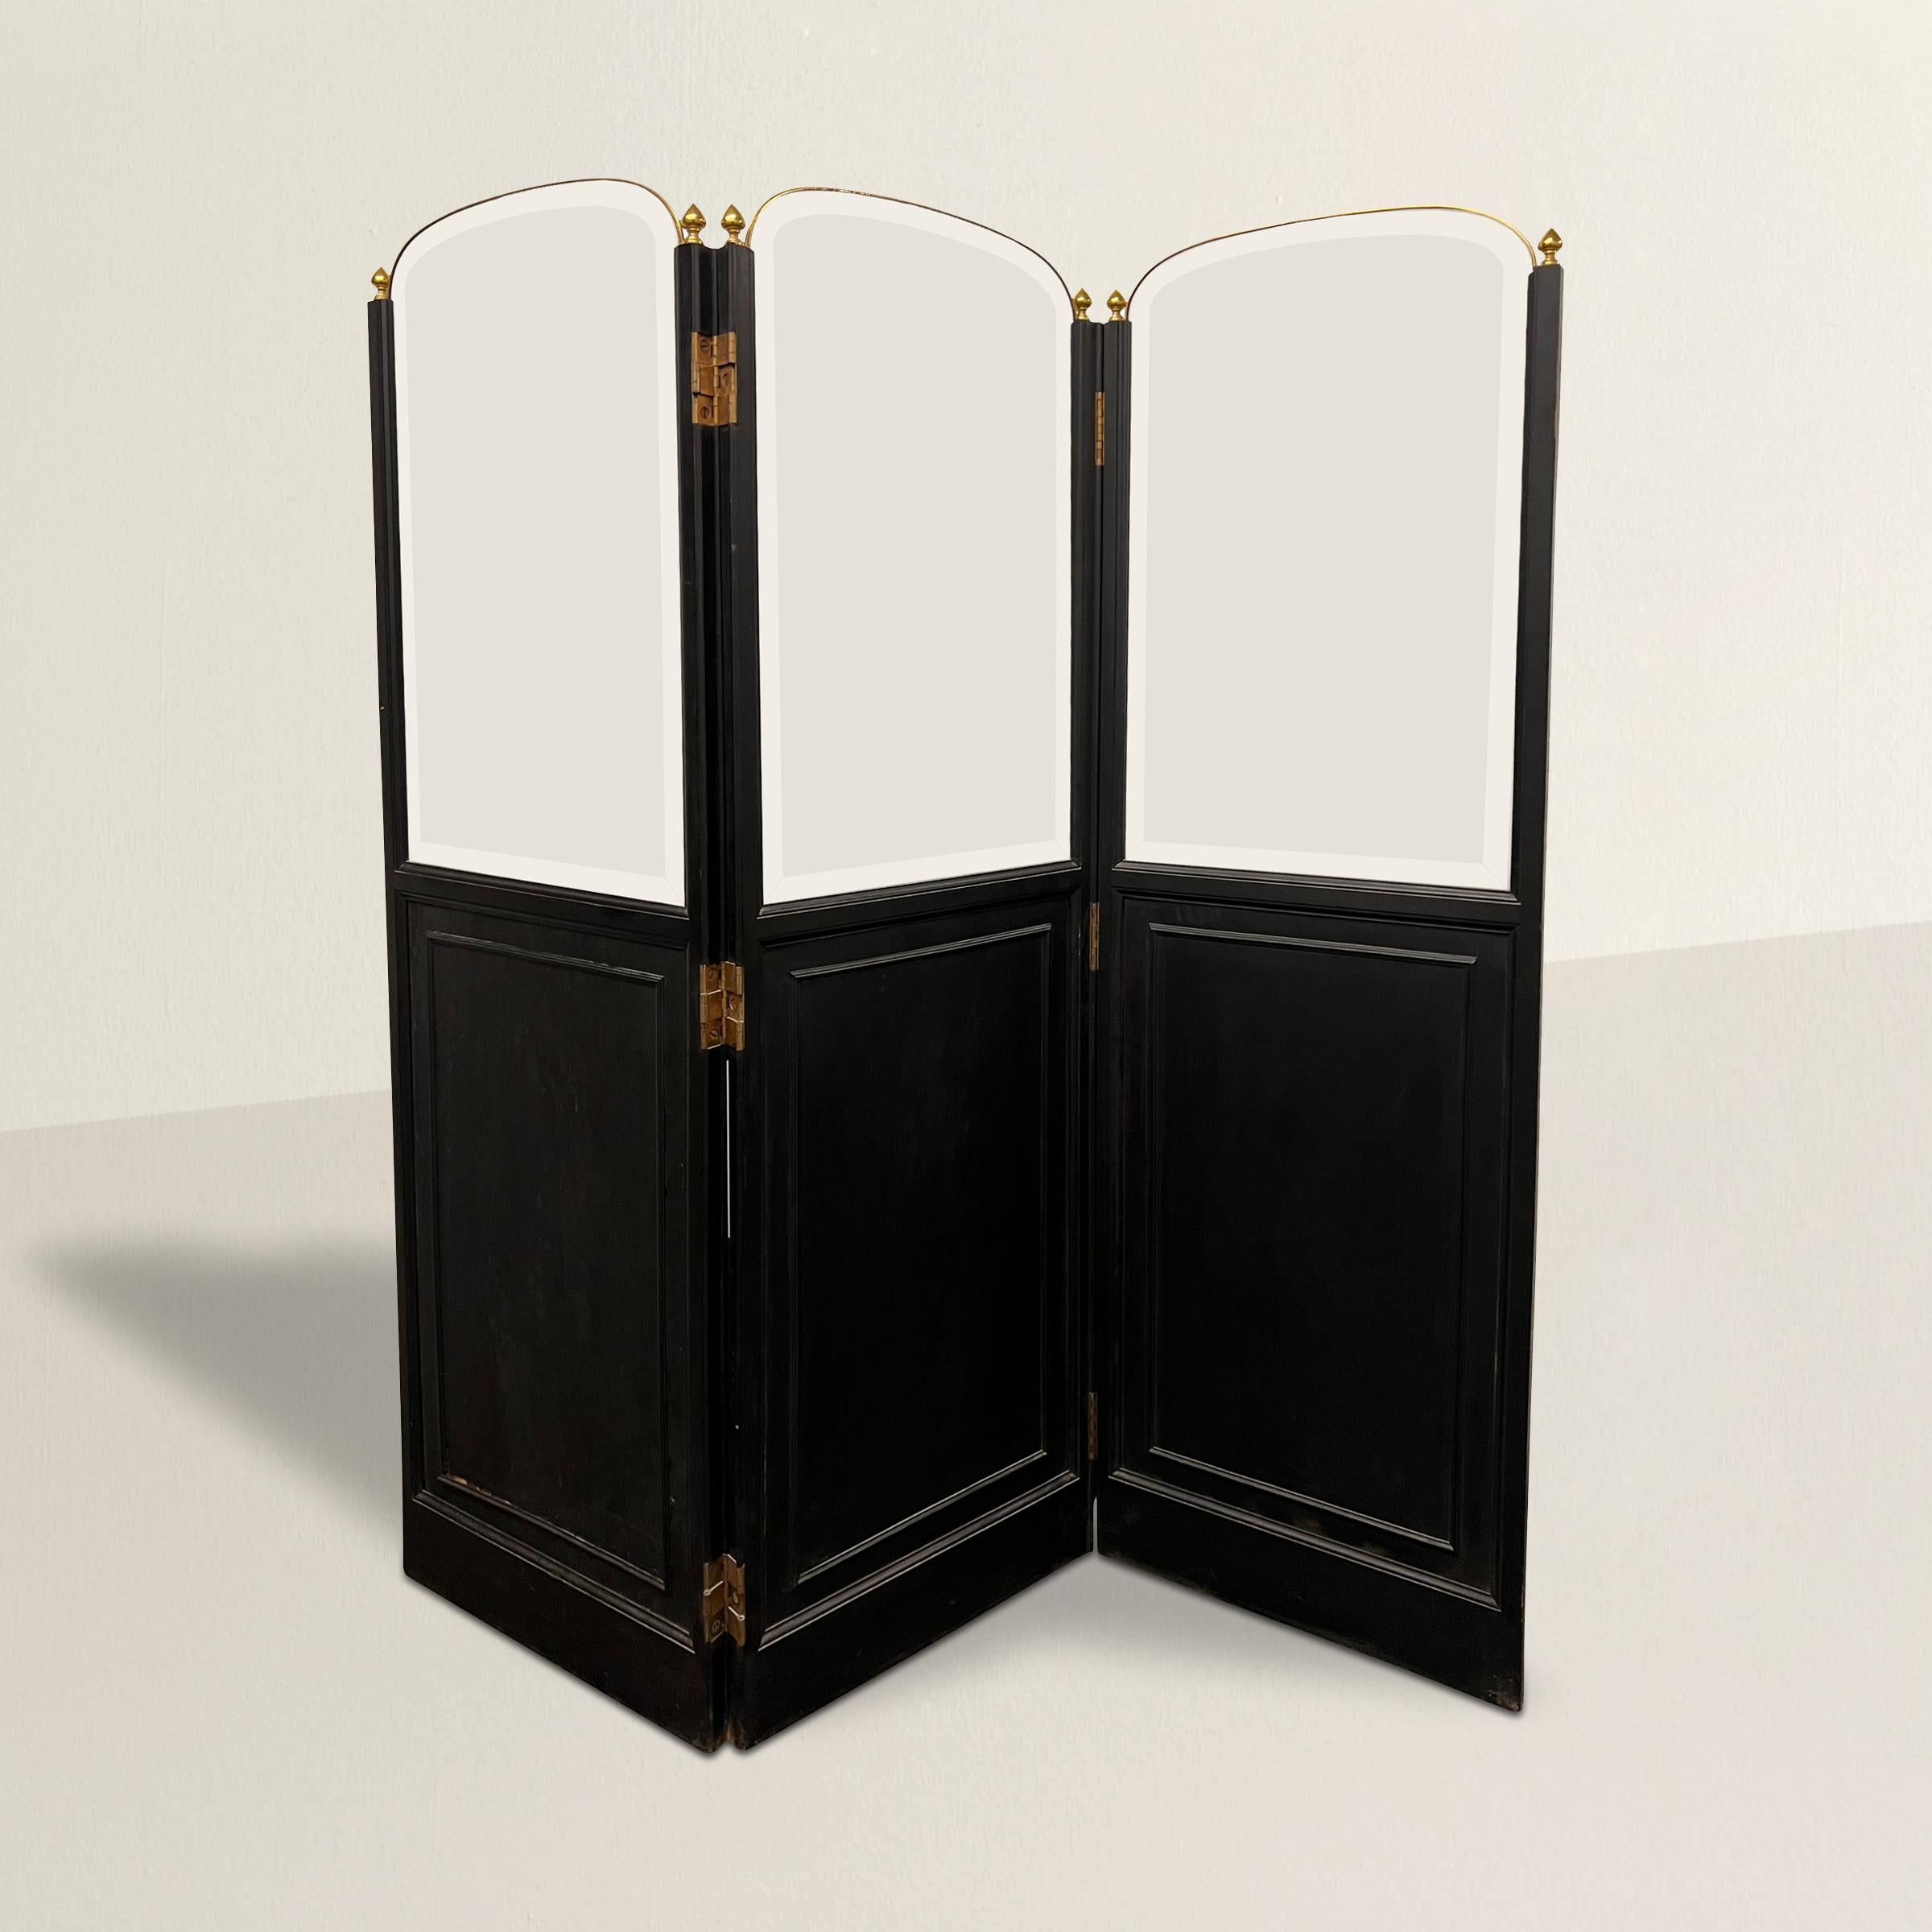 A chic and spectacular early 20th century French Art Nouveau folding screen with three beautifully arched and beveled glass panels held in place with brass frames and brass finials, and with black painted beveled wood panels.  Double action brass